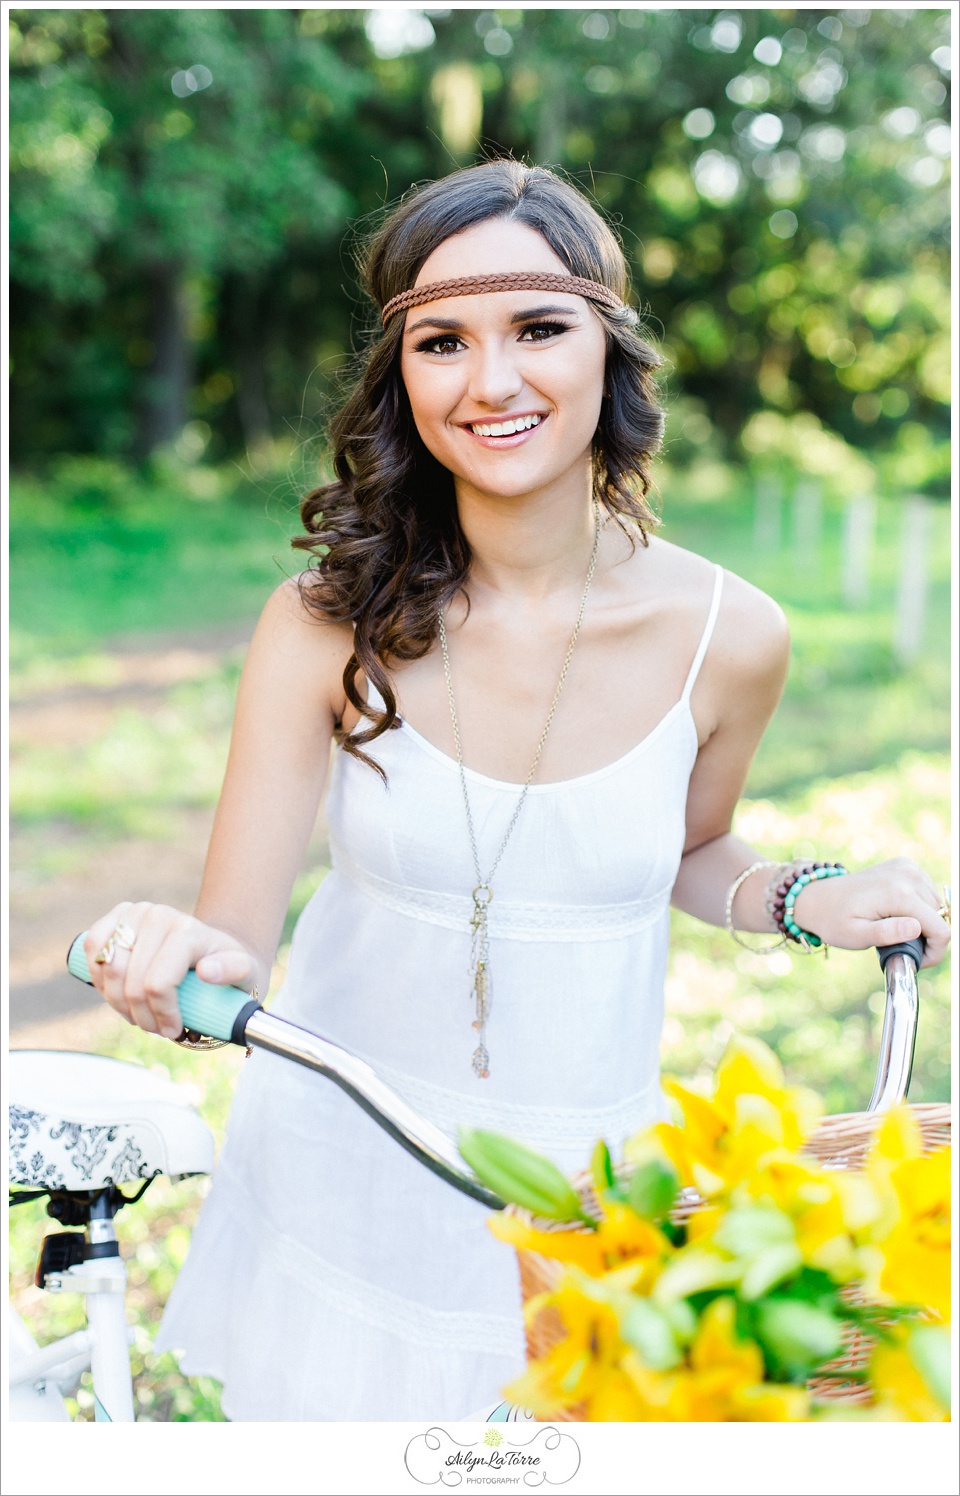 Tampa Senior Photographer |© Ailyn La Torre Photography 2014